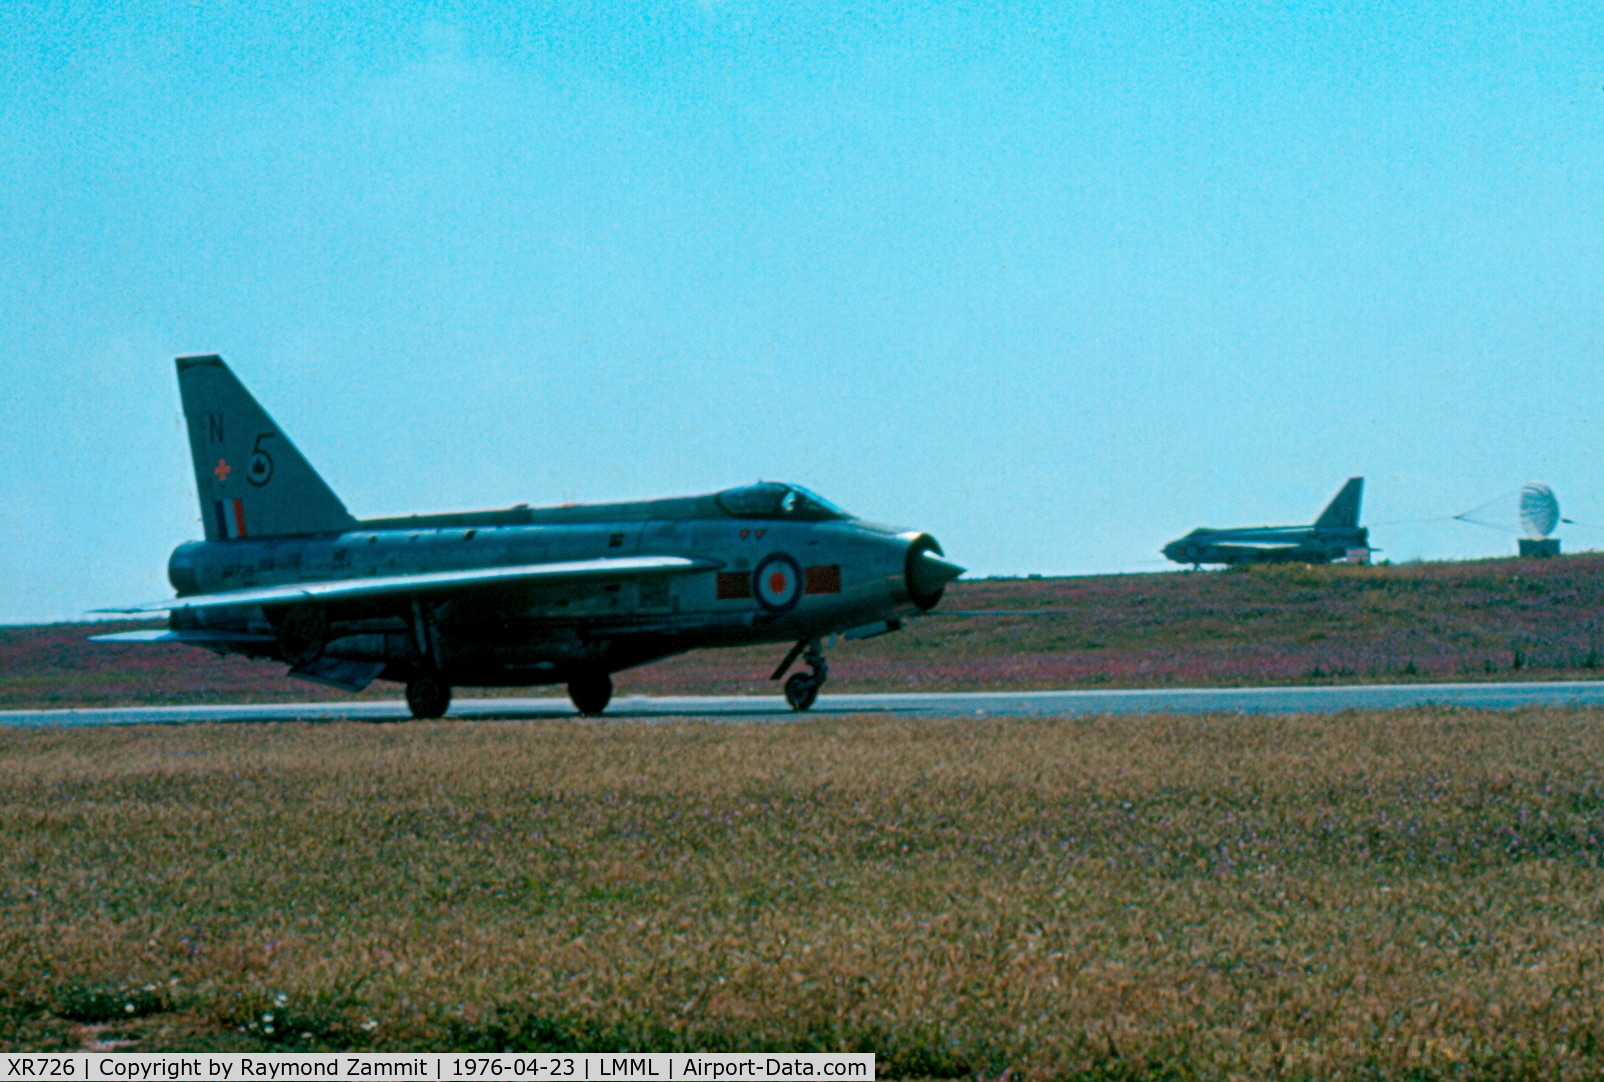 XR726, 1965 English Electric Lightning F.6 C/N 95209, E.E Lightning F.6 XR726/N 5Sqdn Royal Air Force seen taxying out for the sortie while a company aircraft is seen streaming on the runway on landing.